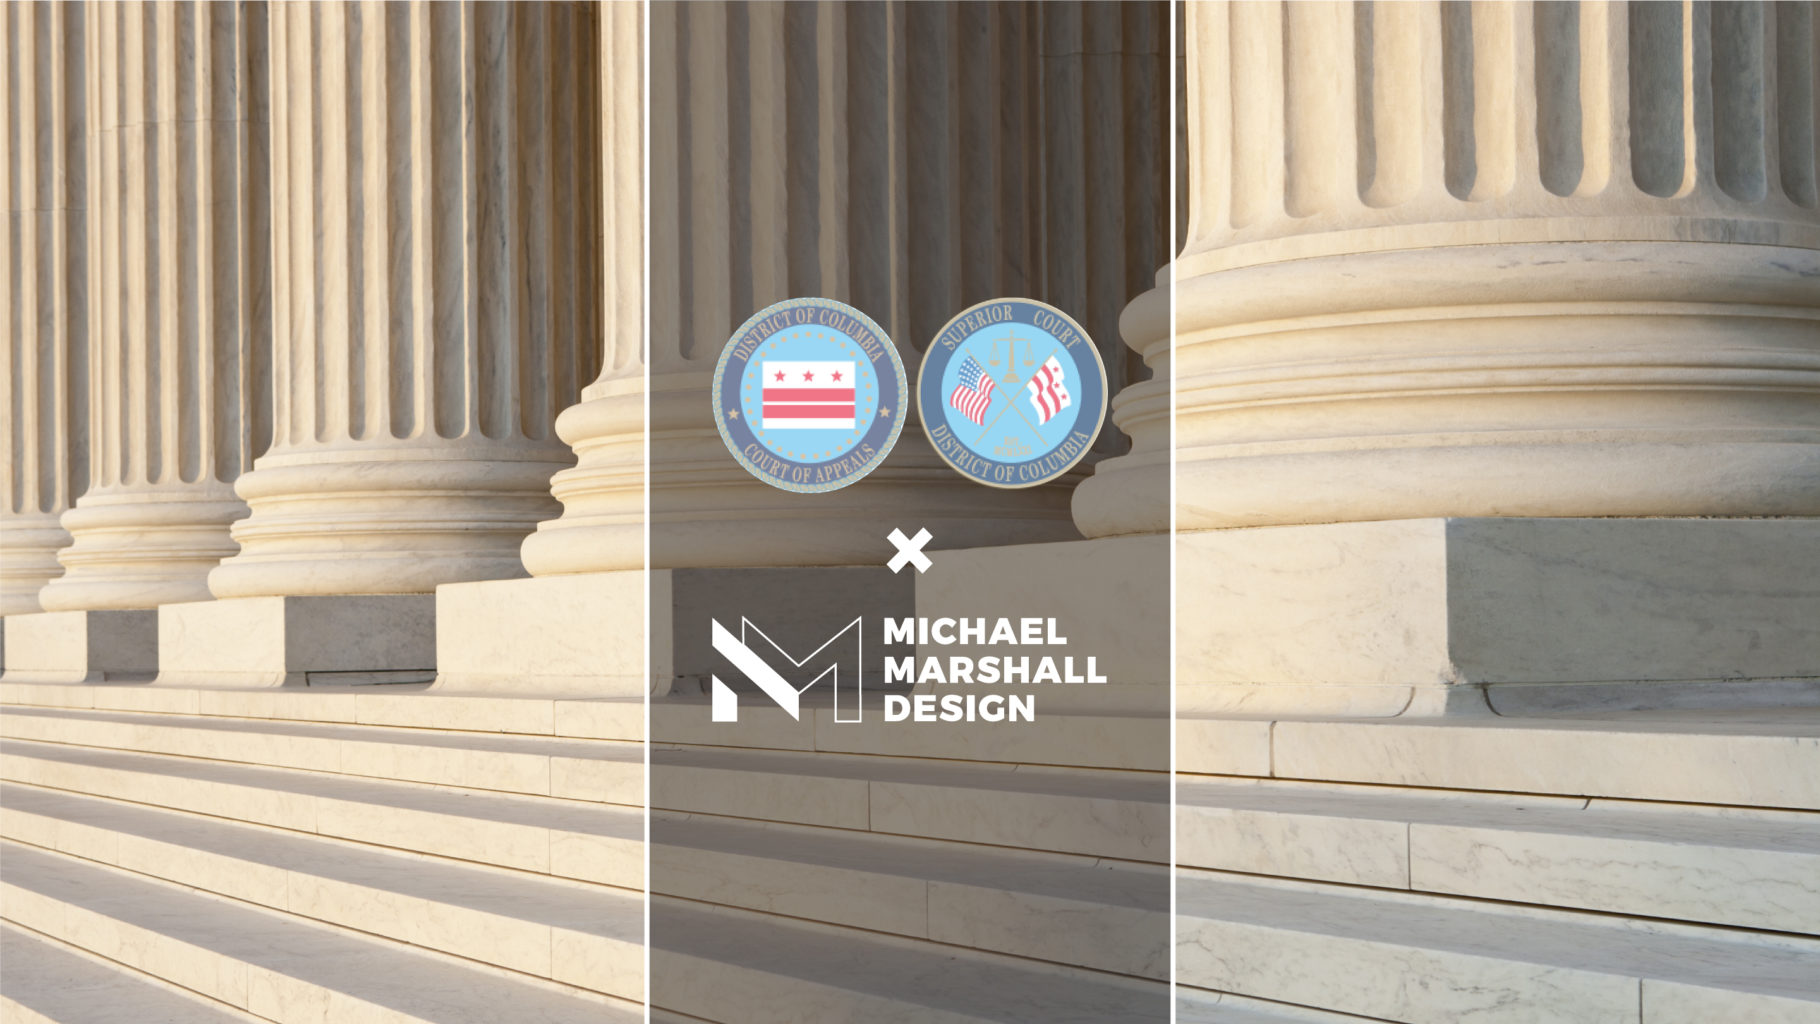 MMD Awarded Design Services for DC Courts